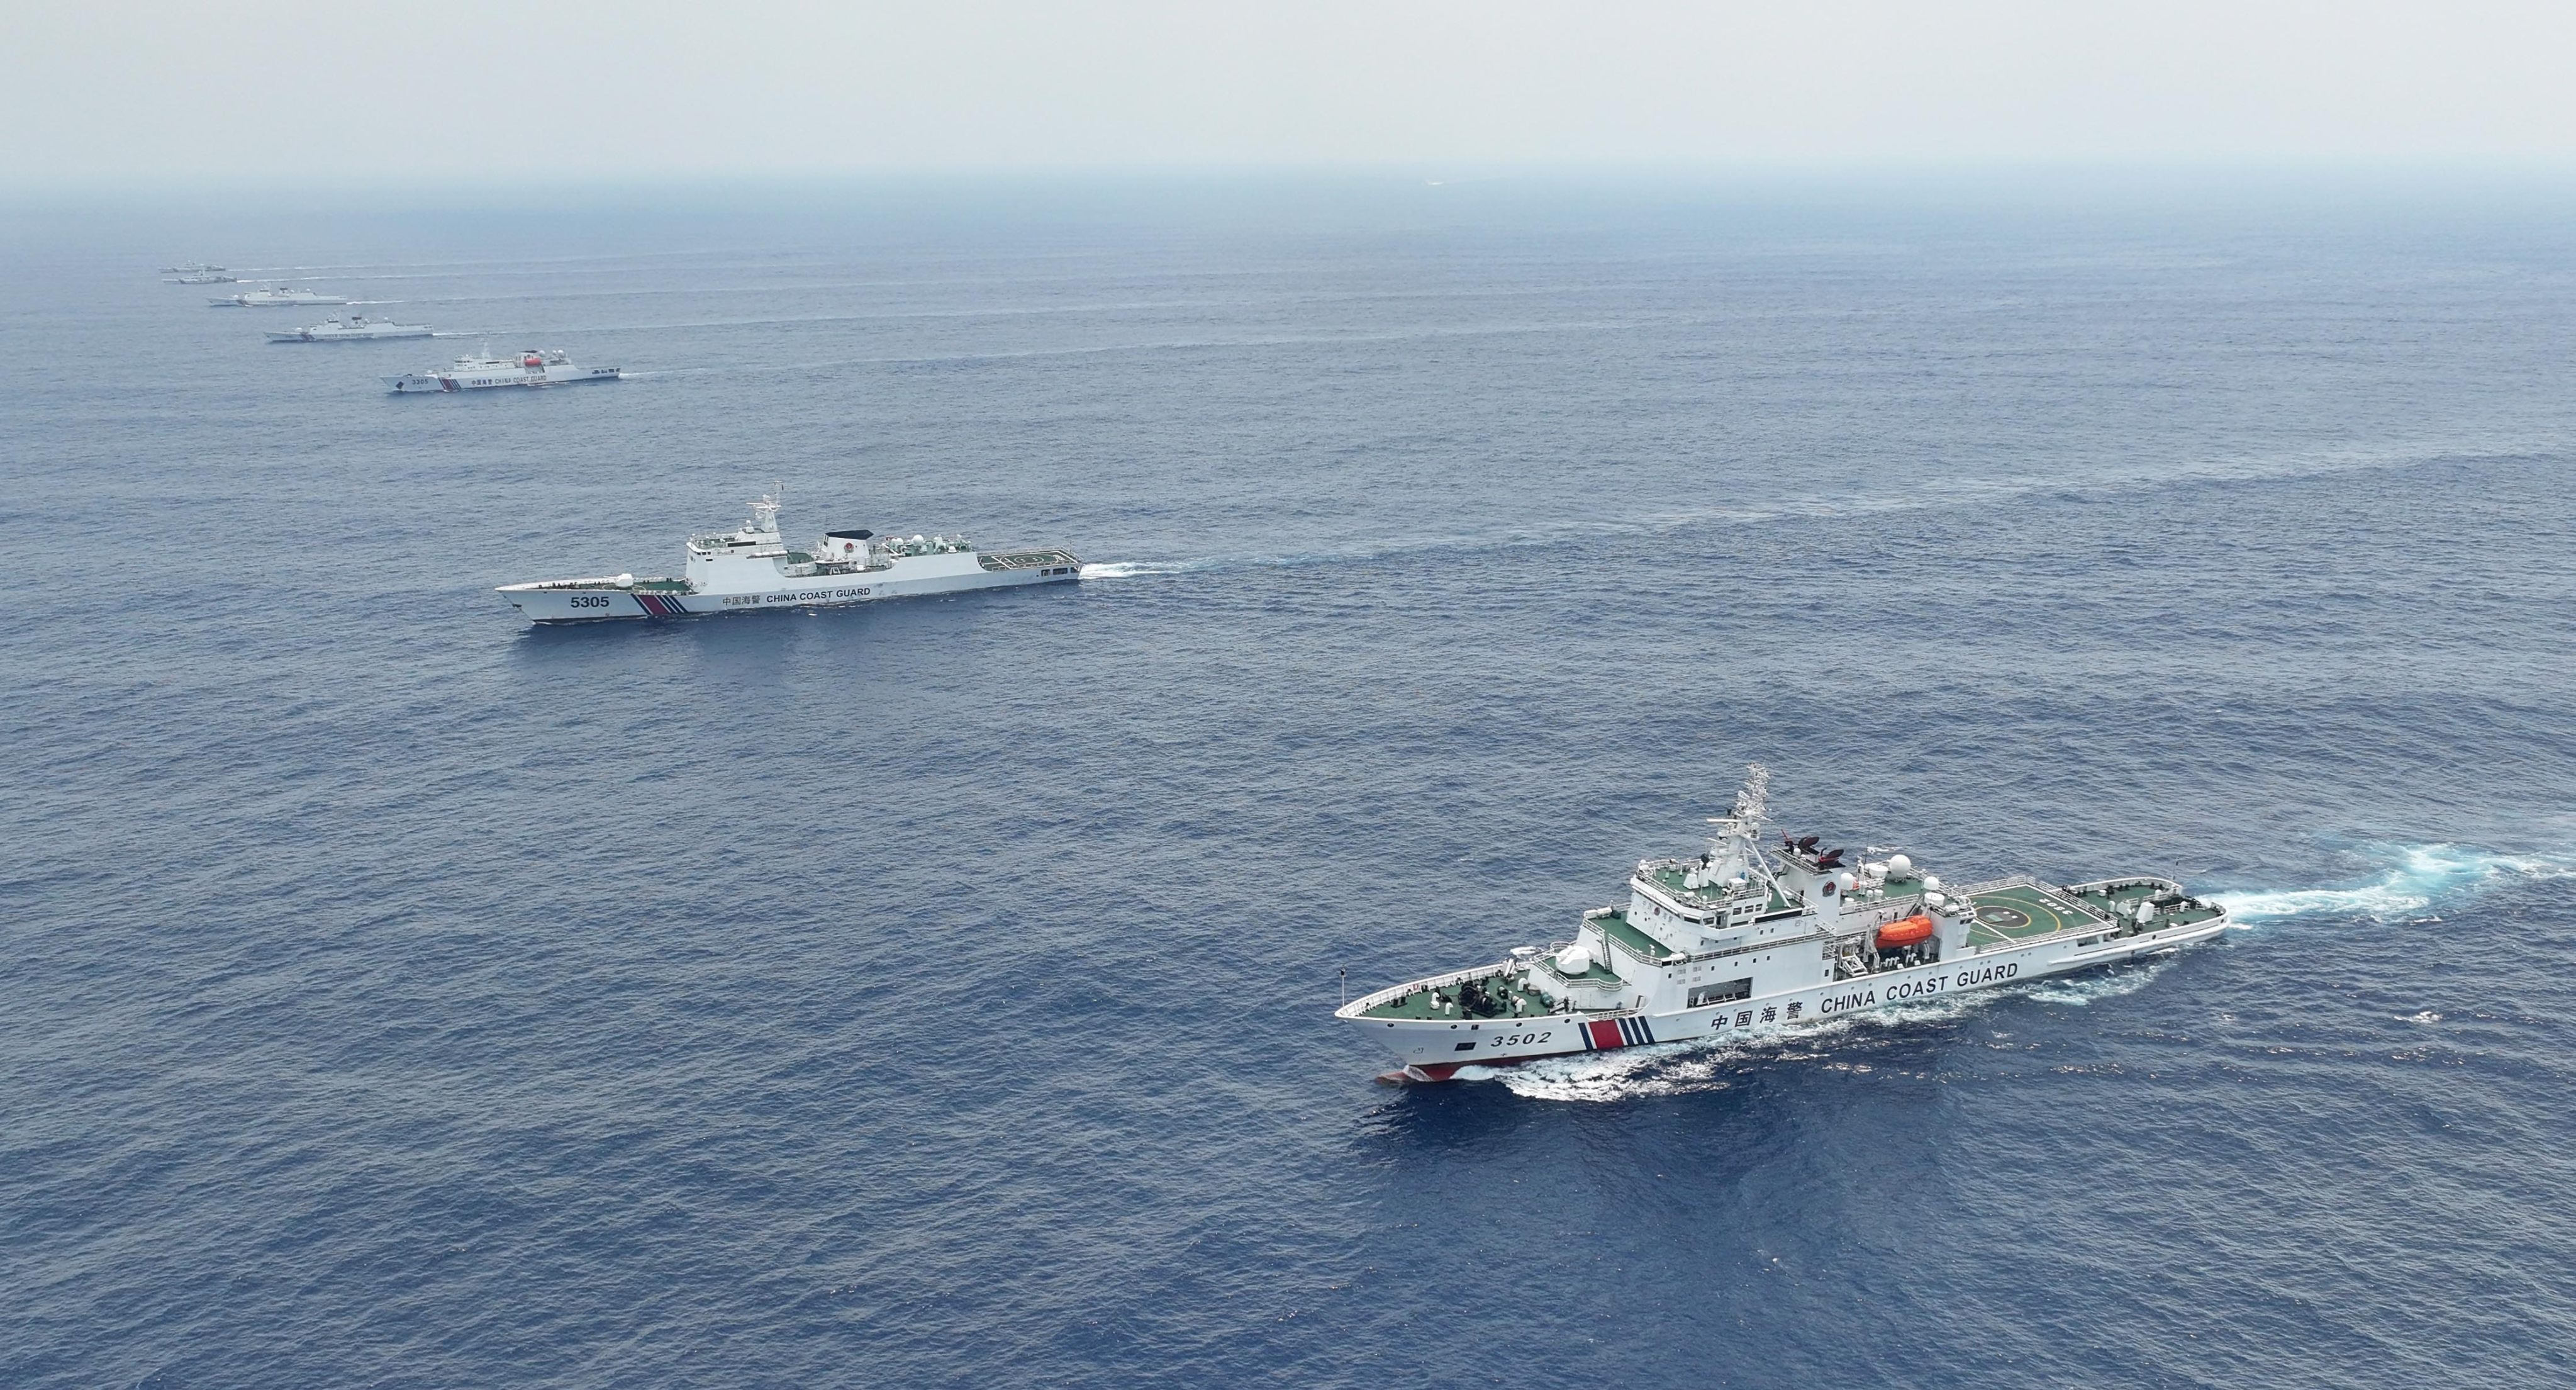 Chinese coastguard vessels patrol the Scarborough Shoal in the disputed South China Sea on May 17. Photo: Xinhua